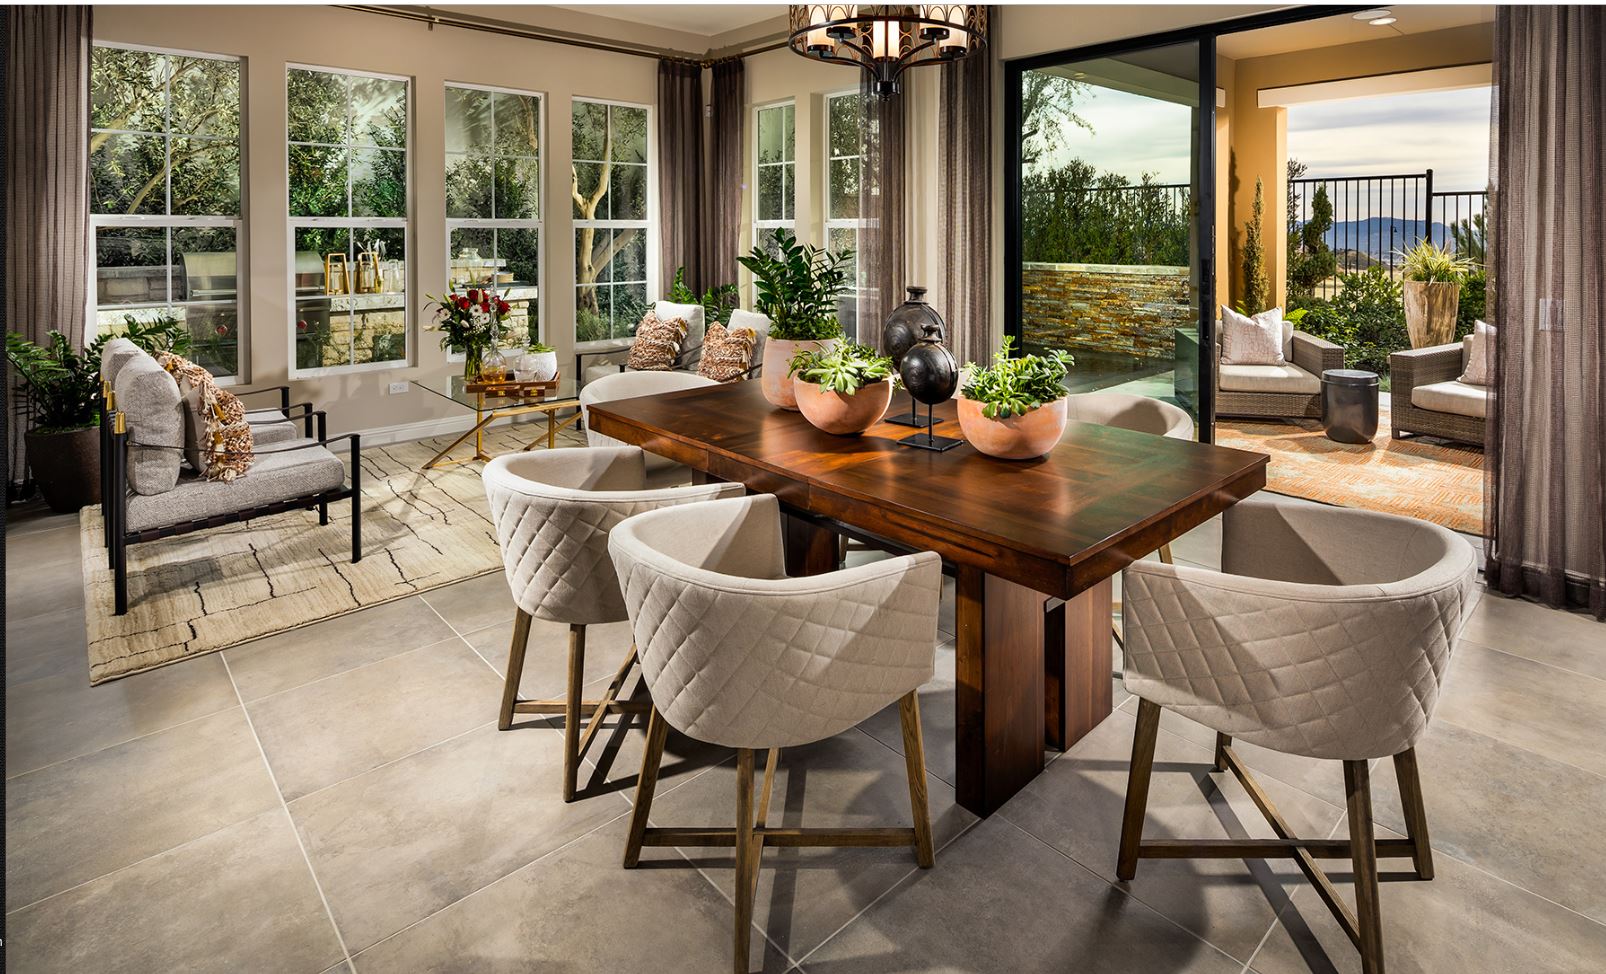 Cozy and beautiful dining area with a sliding glass door